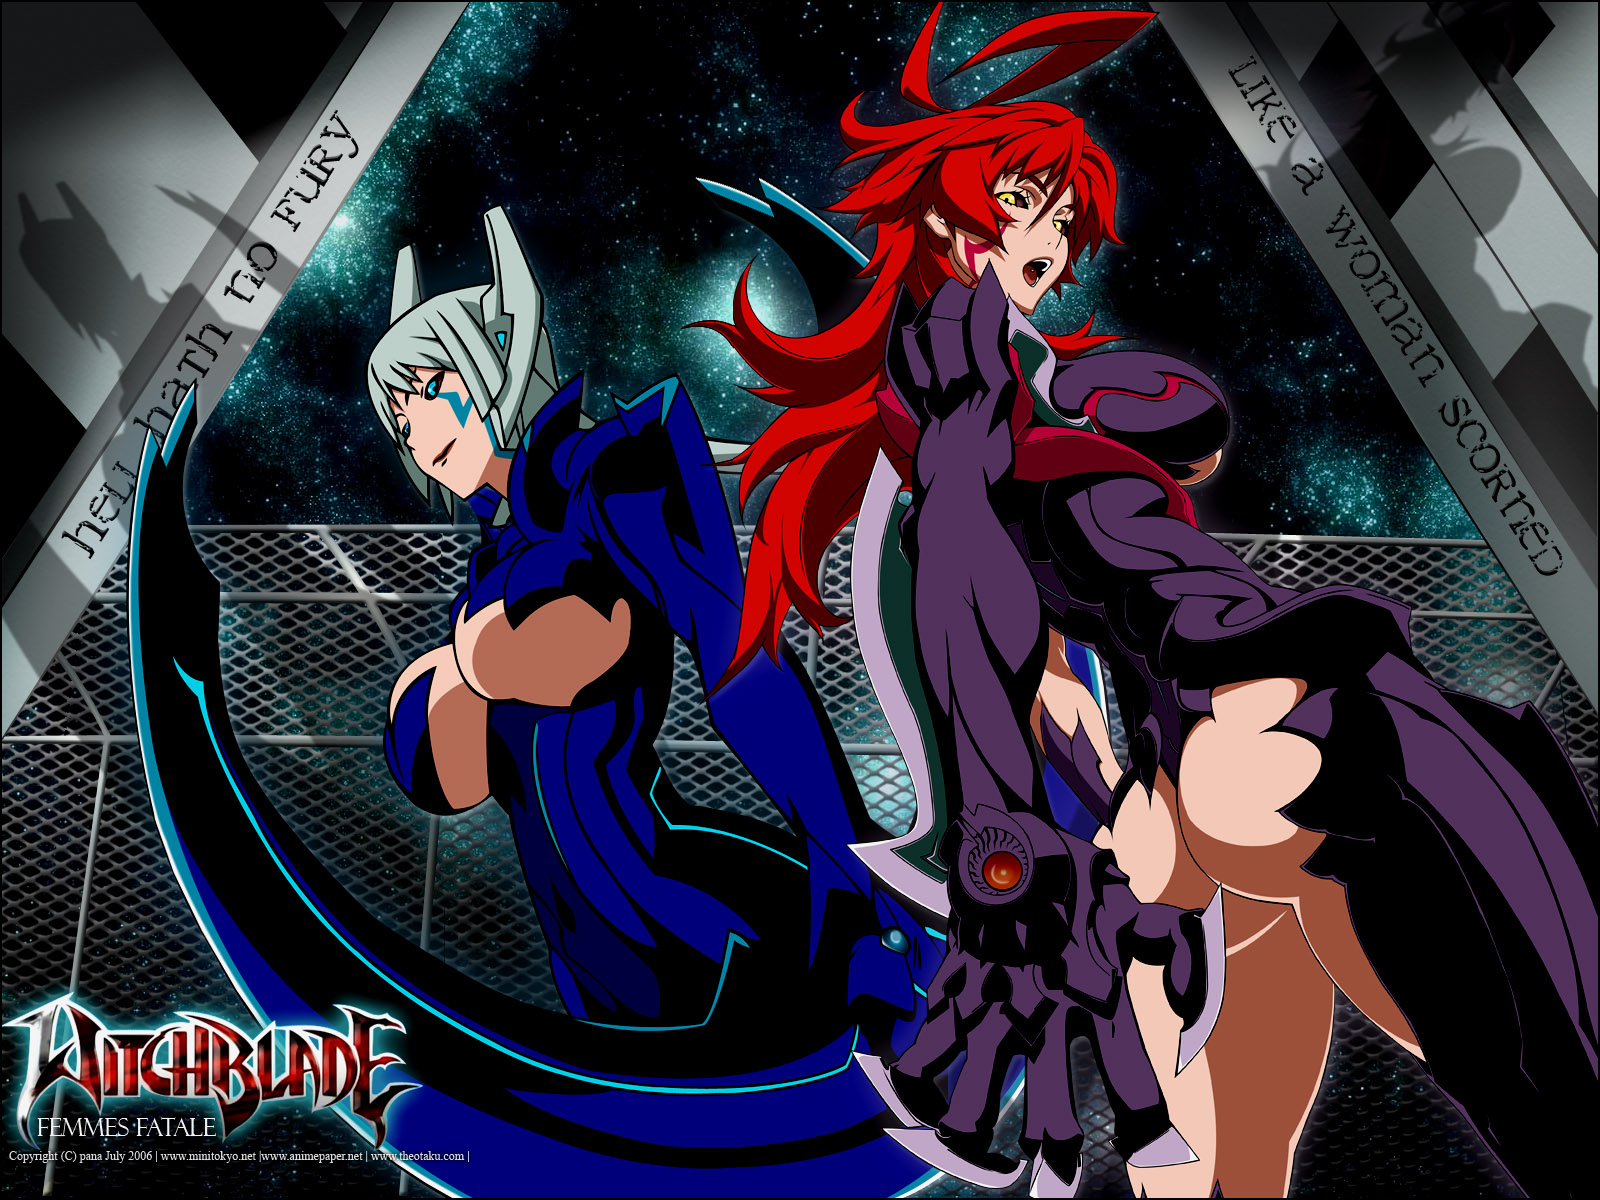 Witchblade Anime Wallpaper